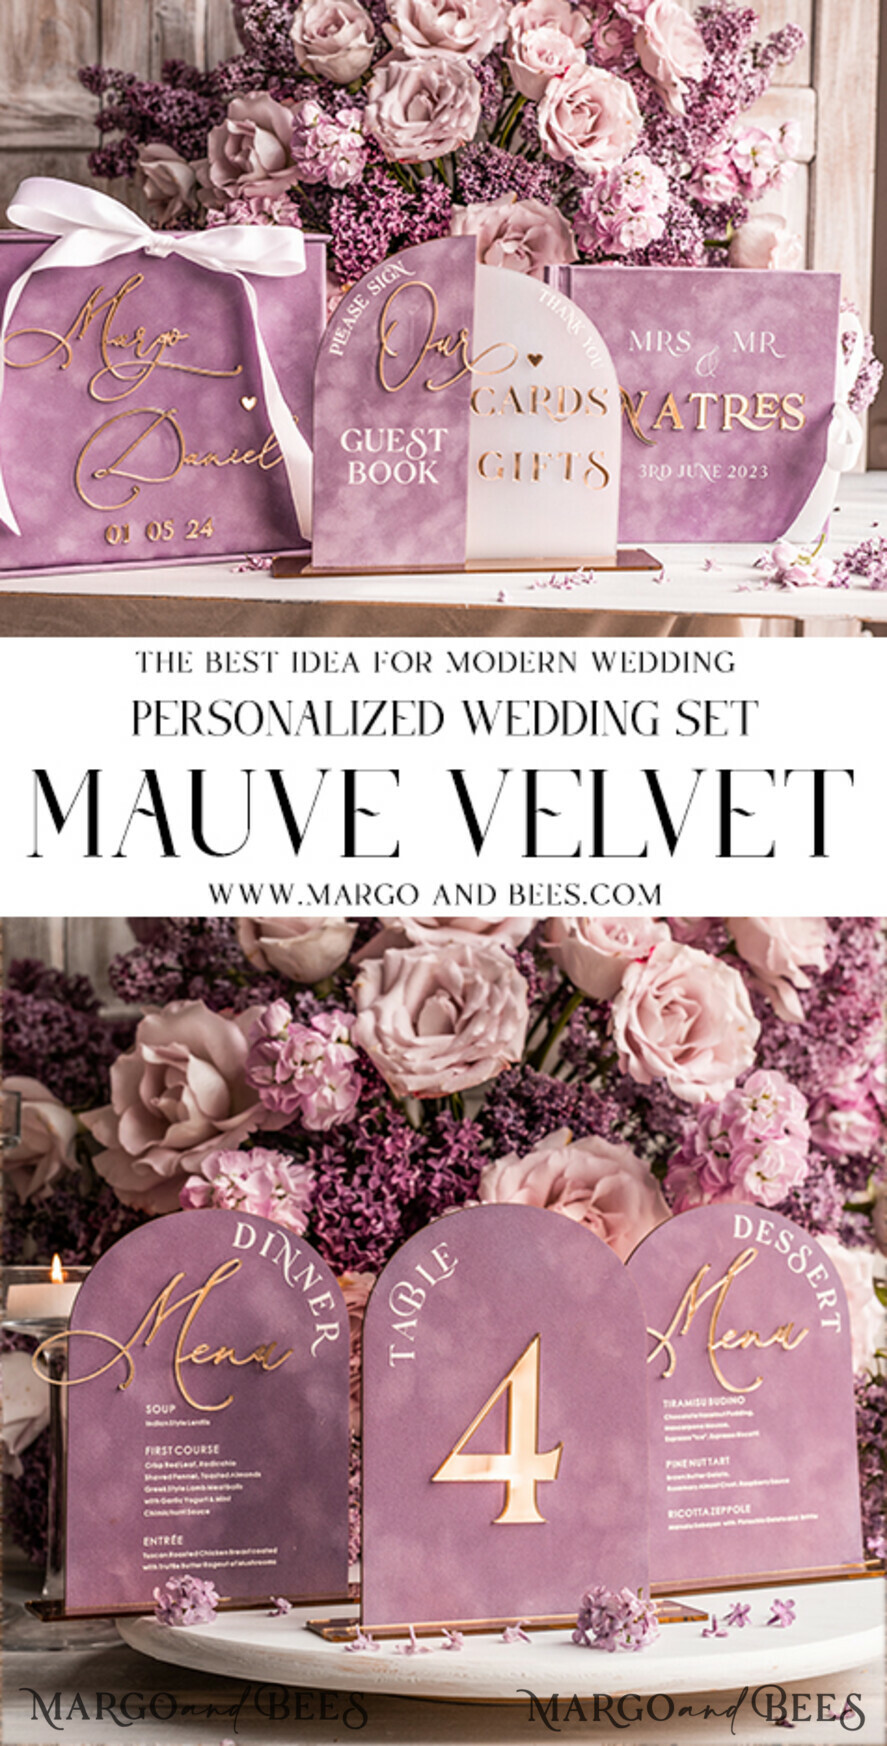 Mauve and Dusty Rose Weddings